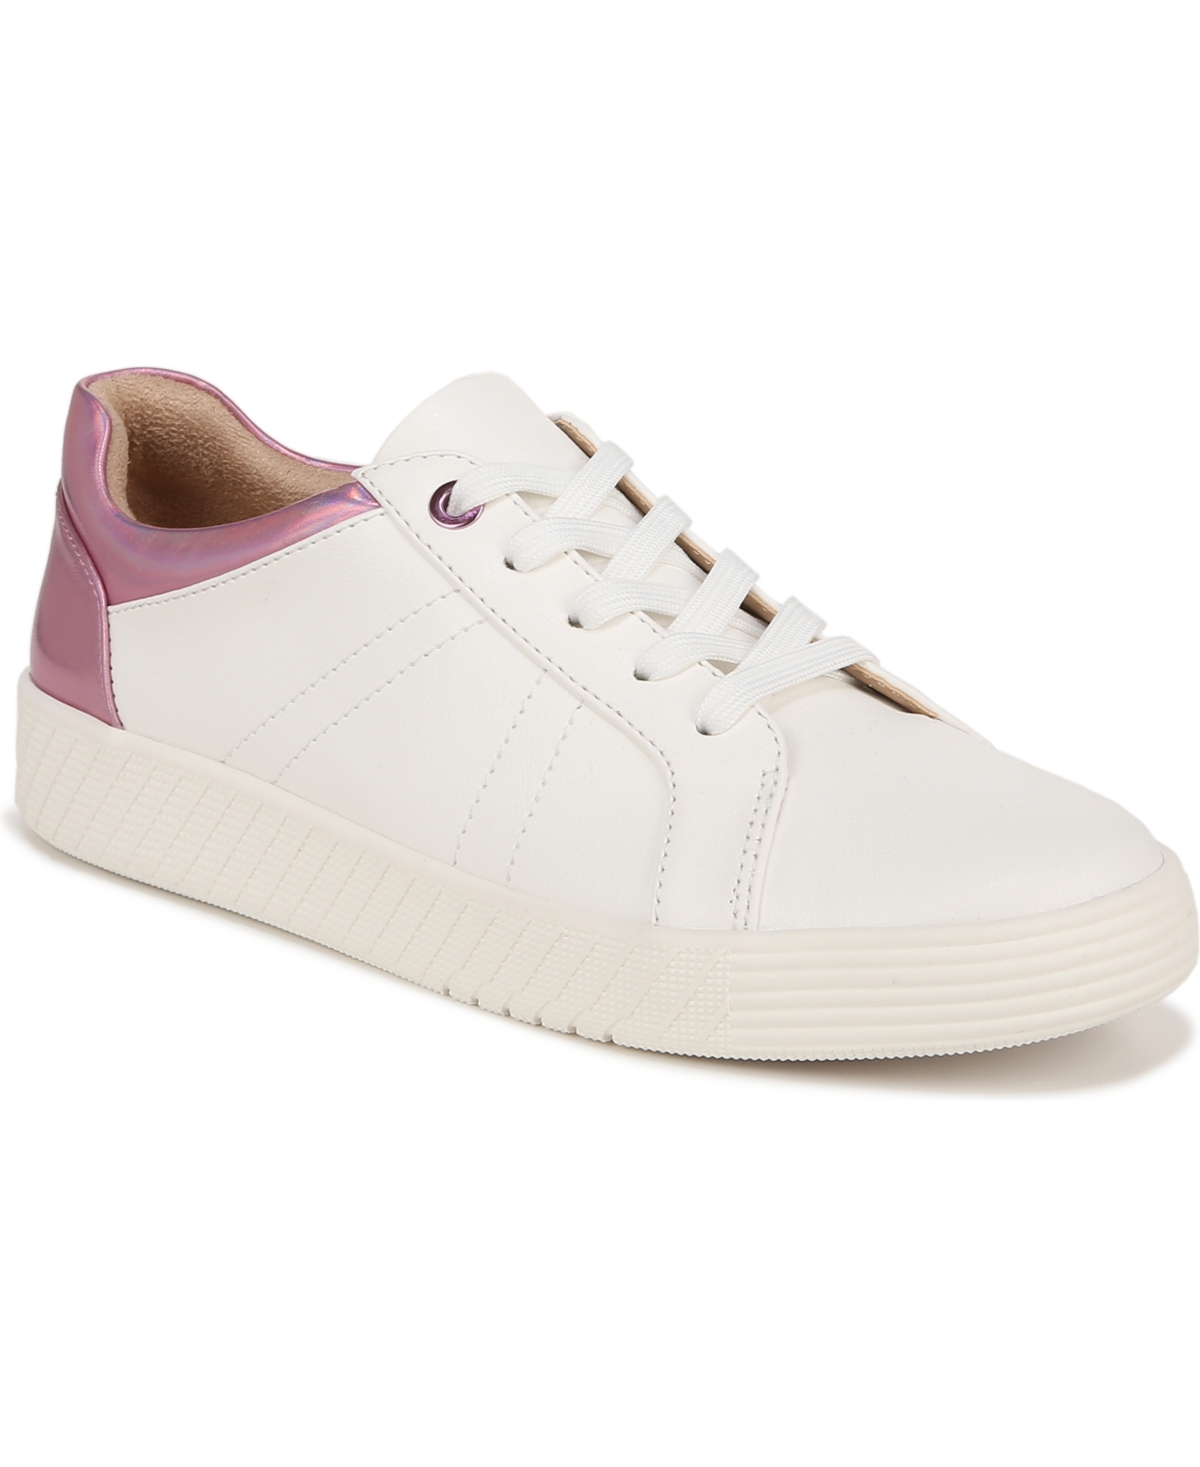 Soul Naturalizer Neela Sneakers Women's Shoes In White/pink Faux Leather